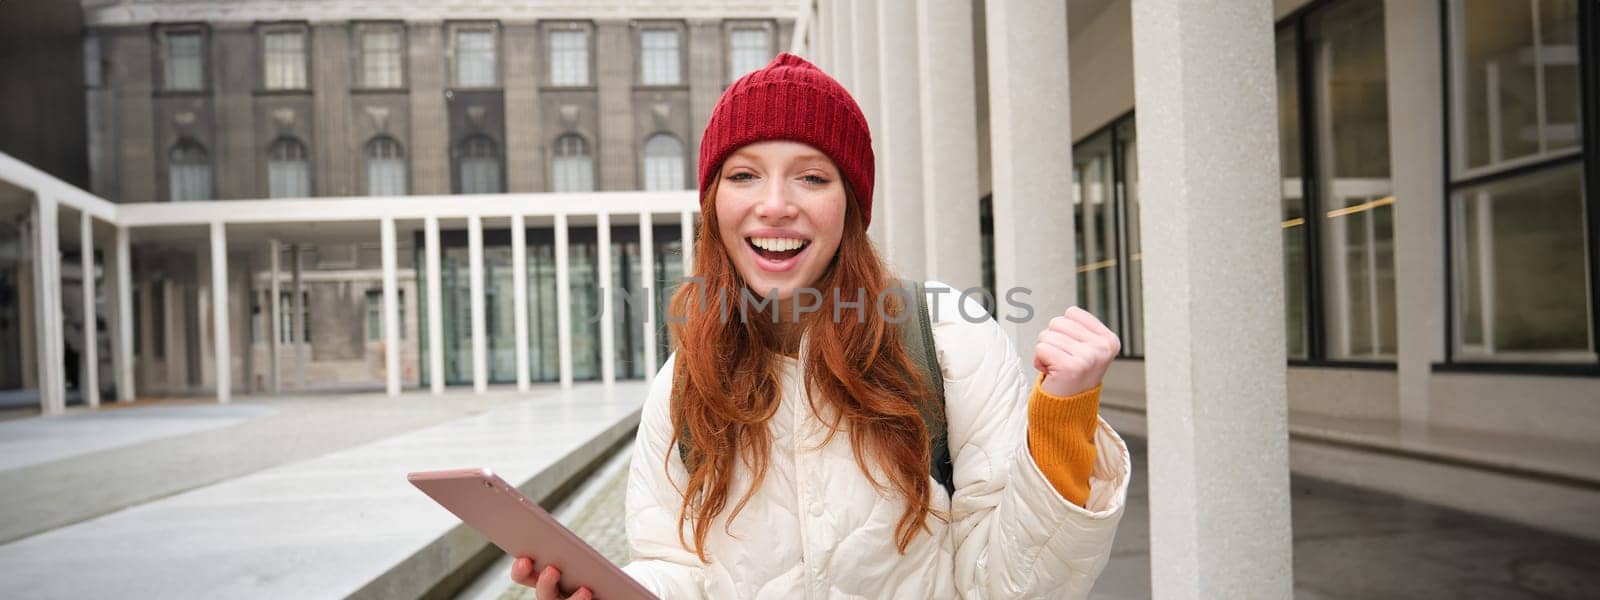 Stylish ginger girl, tourist walks with digital tablet around city, woman connects to iternet on her gadget, looking up information, texting message.